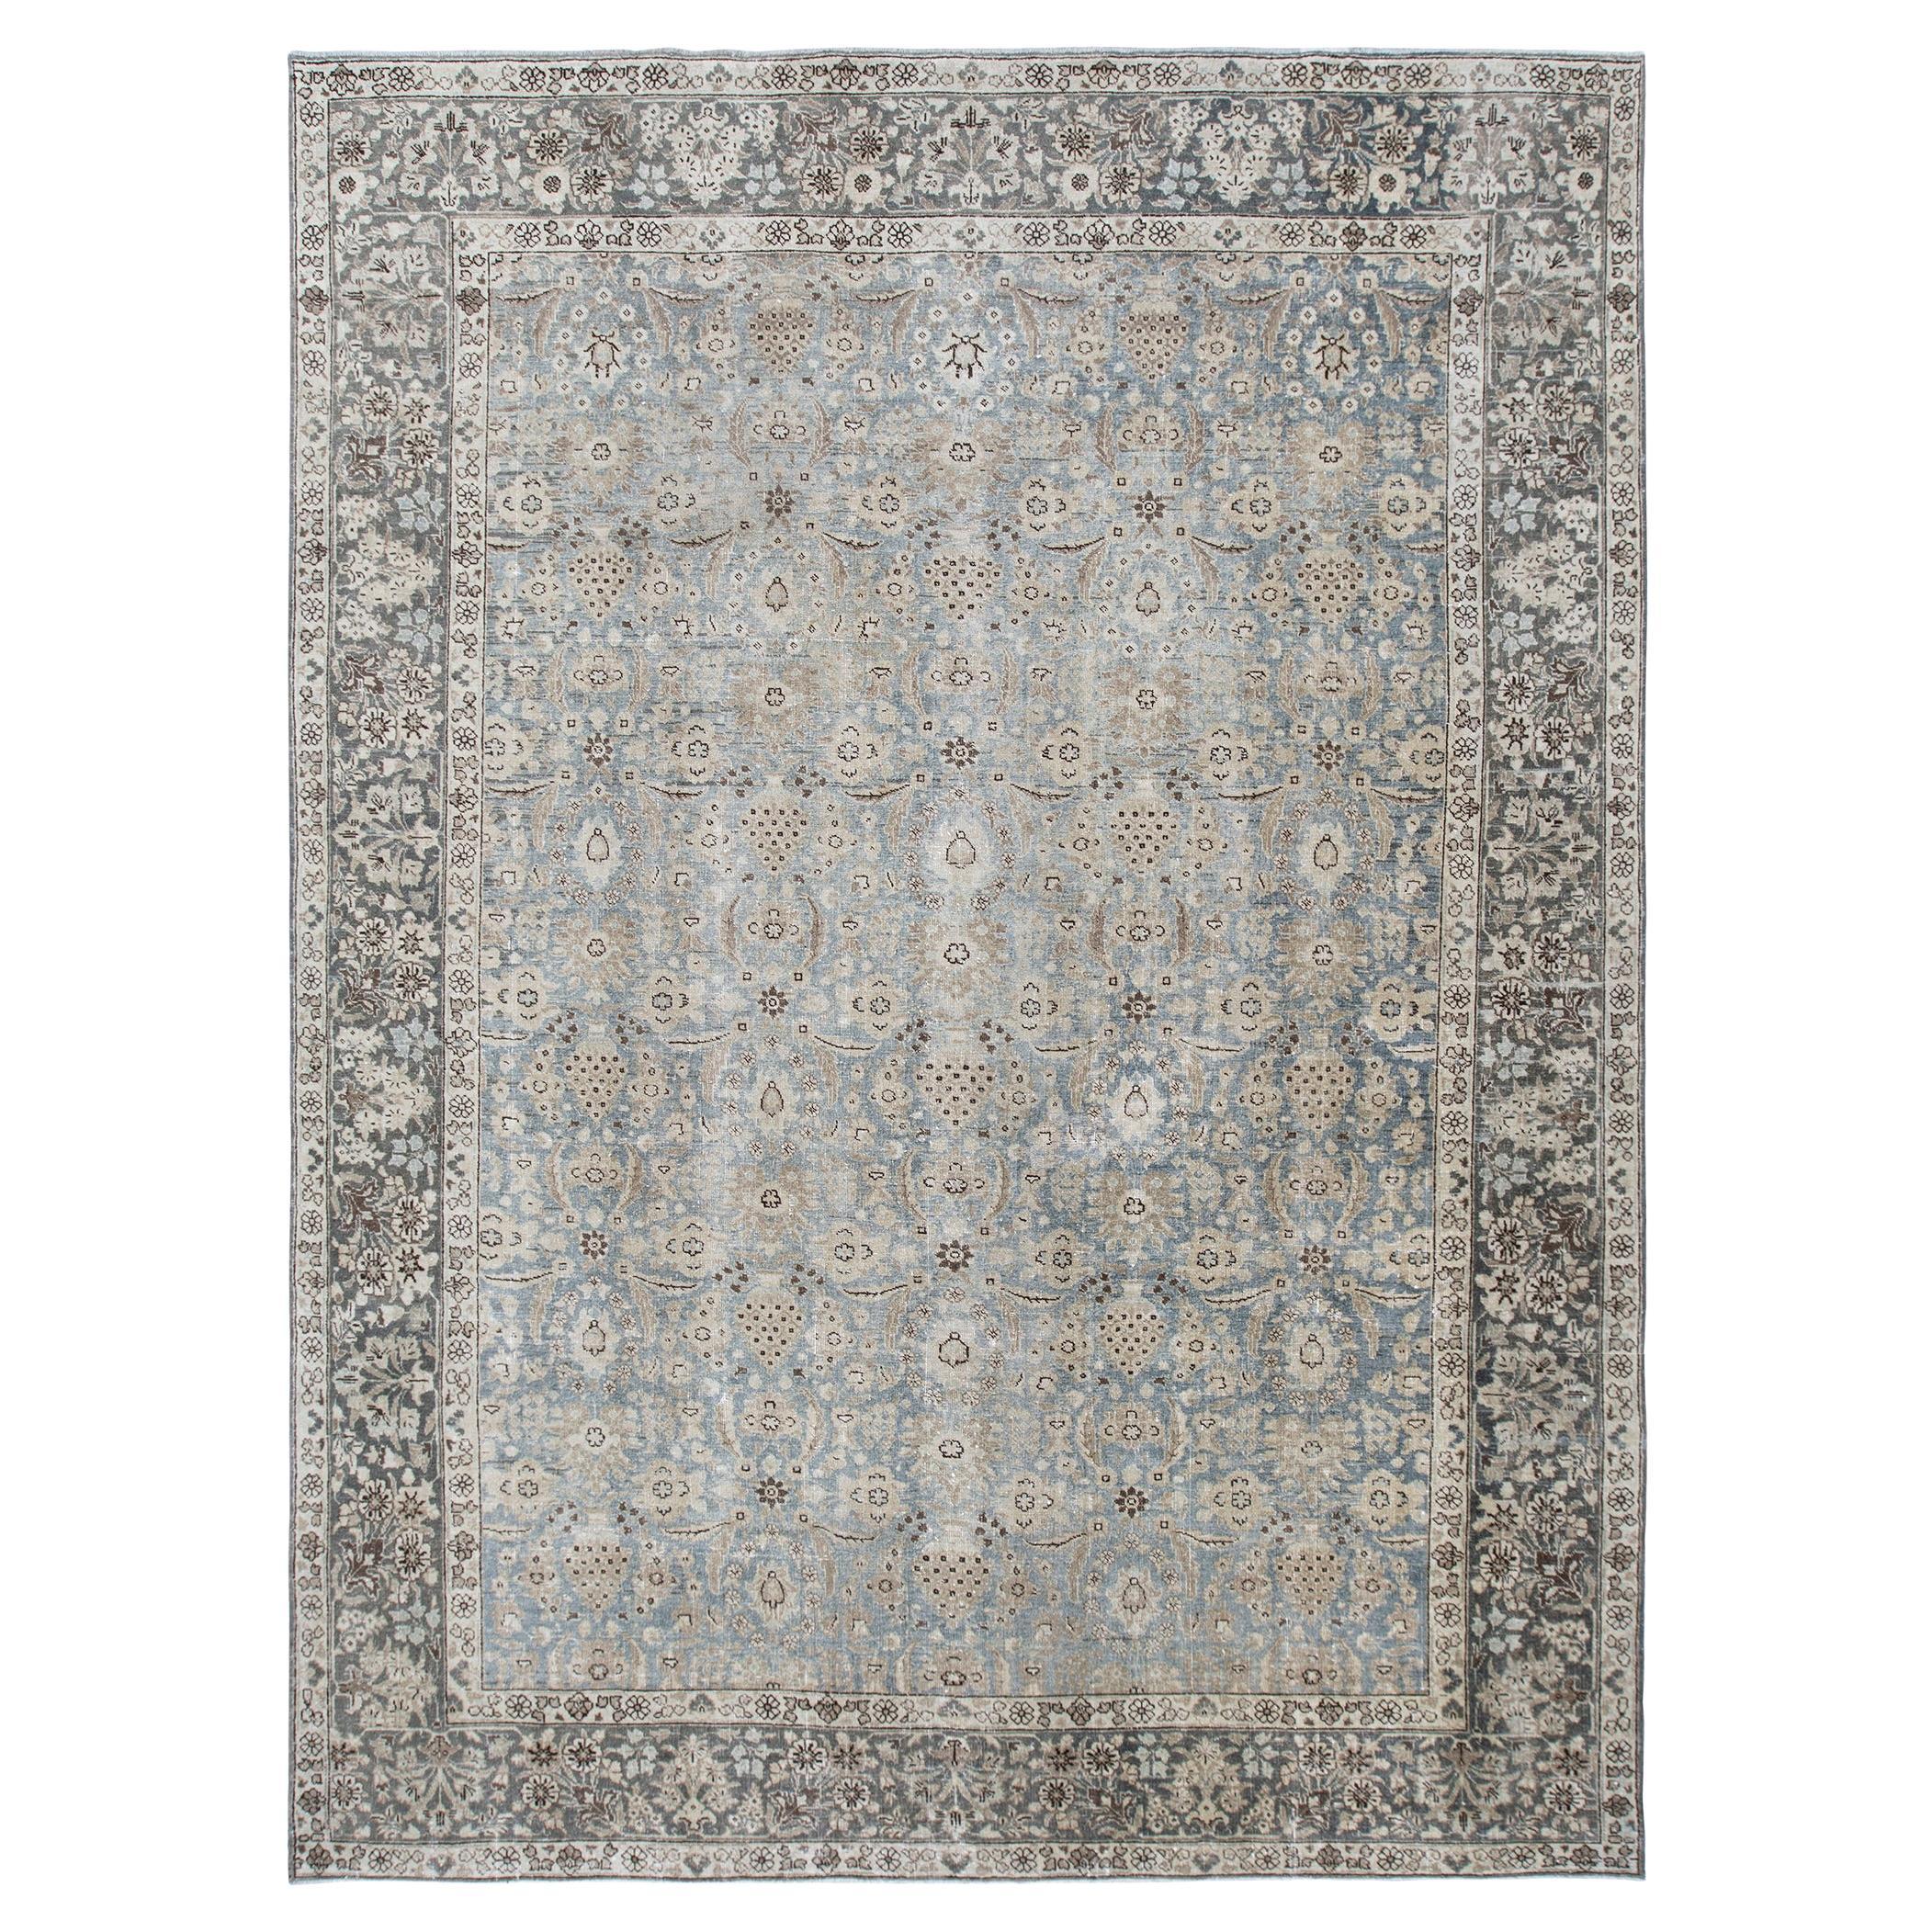 Early 20th Century Antique Persian Tabriz Hand Knotted Blue Rug